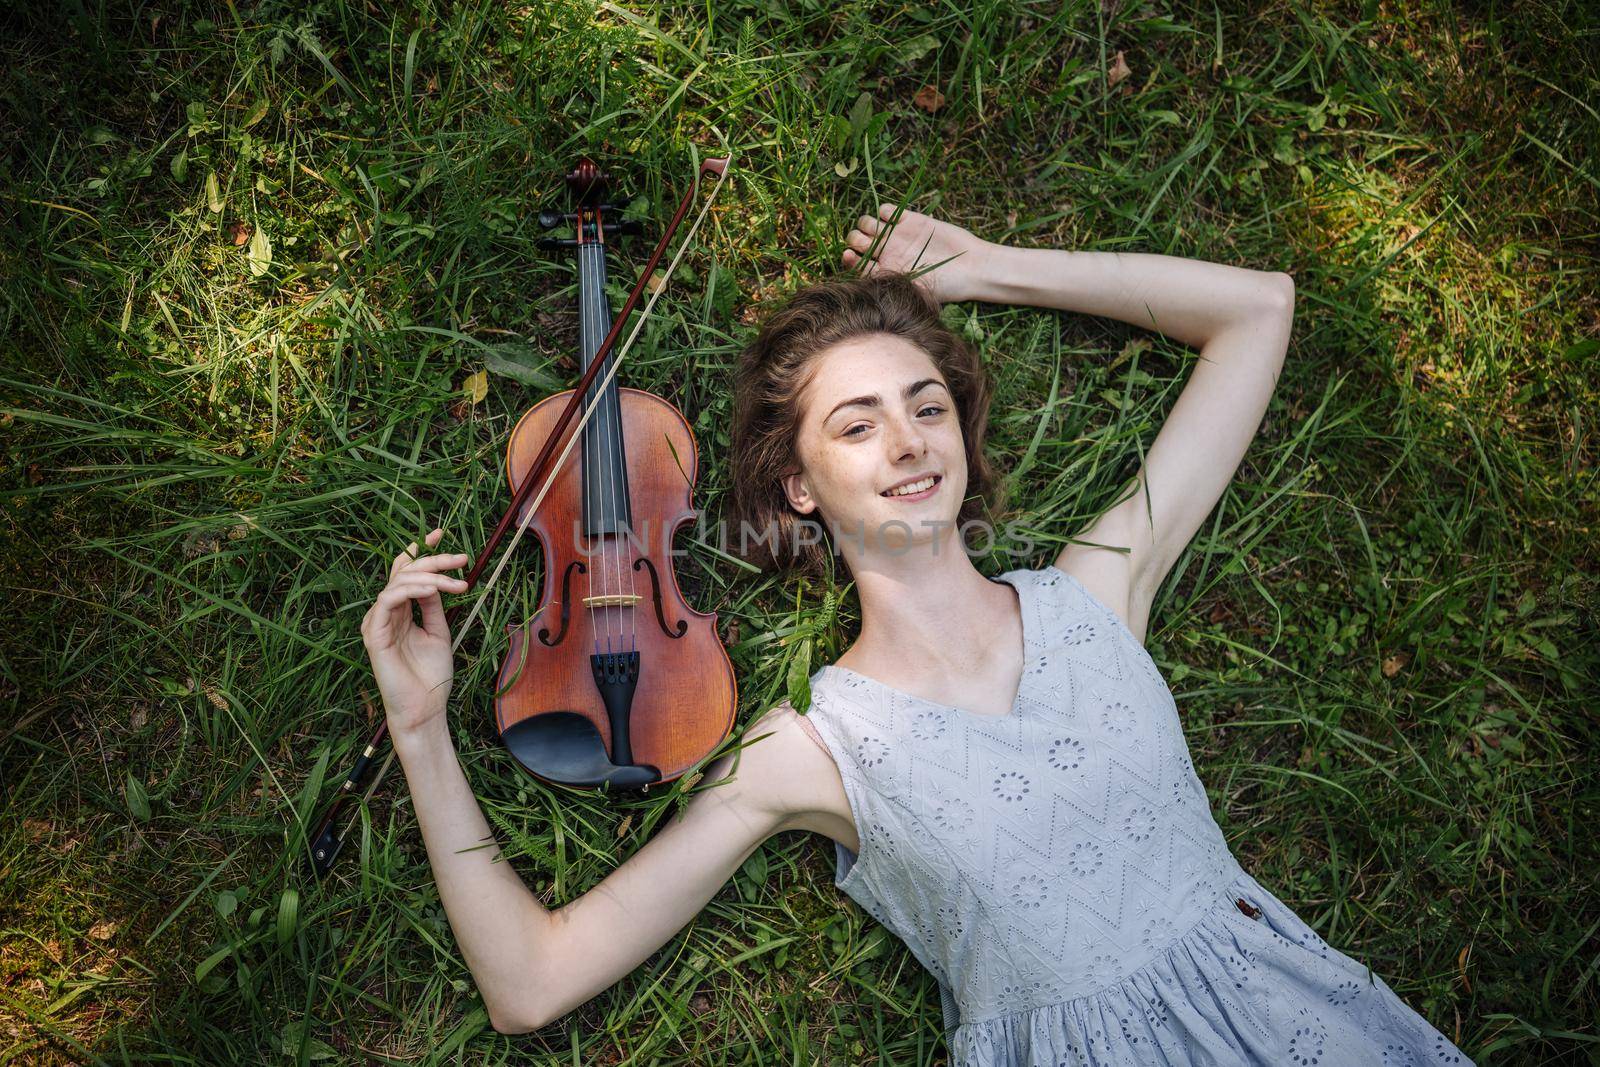 The girl lies with a violin on the grass in a city park